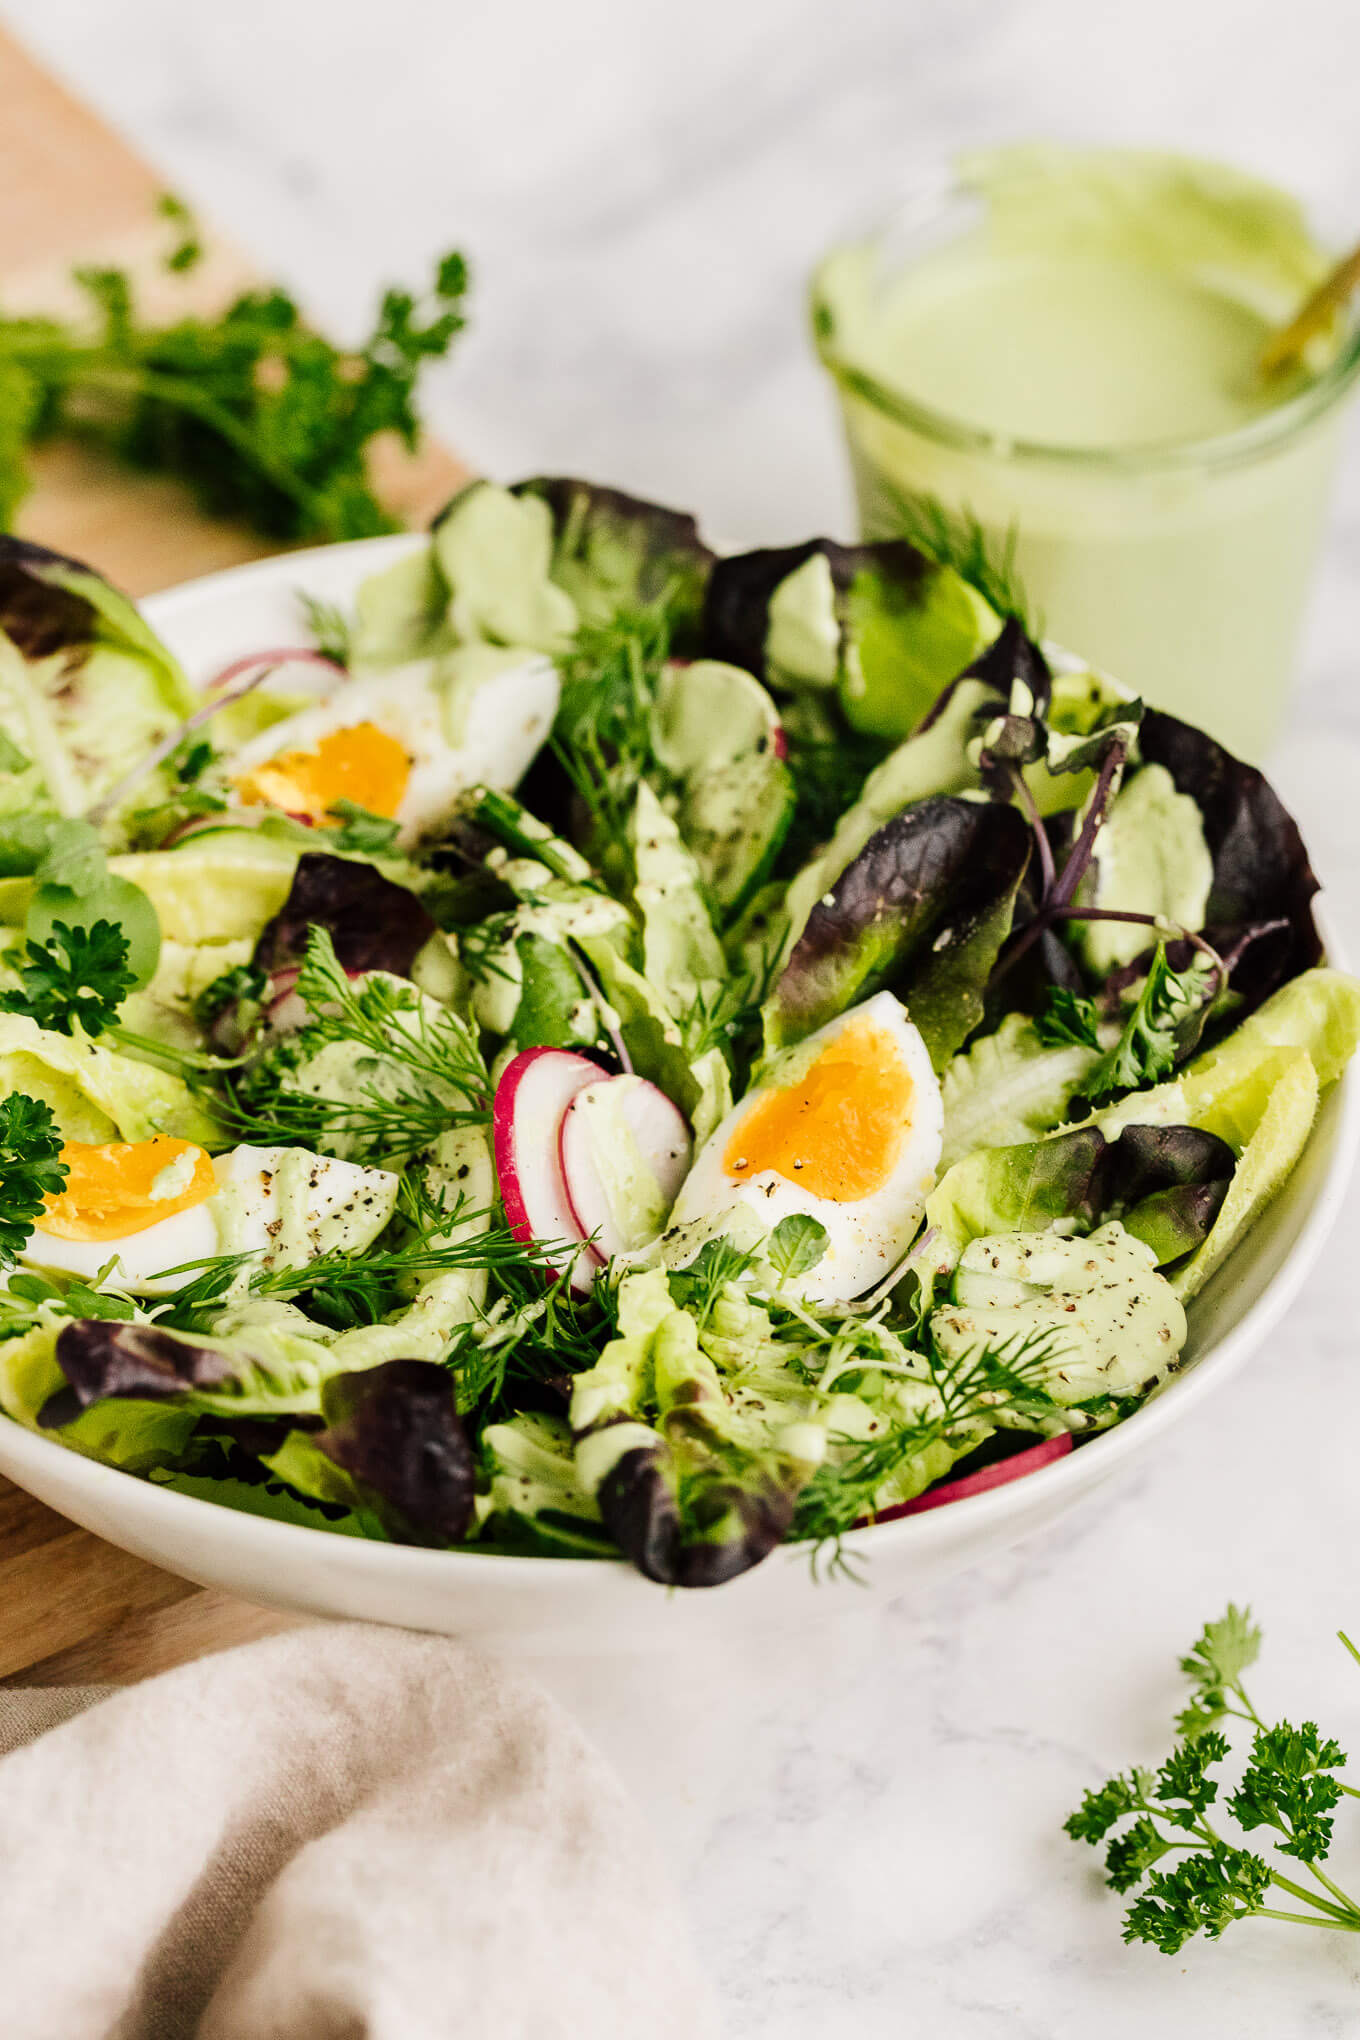 Spring salad with jammy eggs and green goddess dressing made with cashews. Dairy-free.